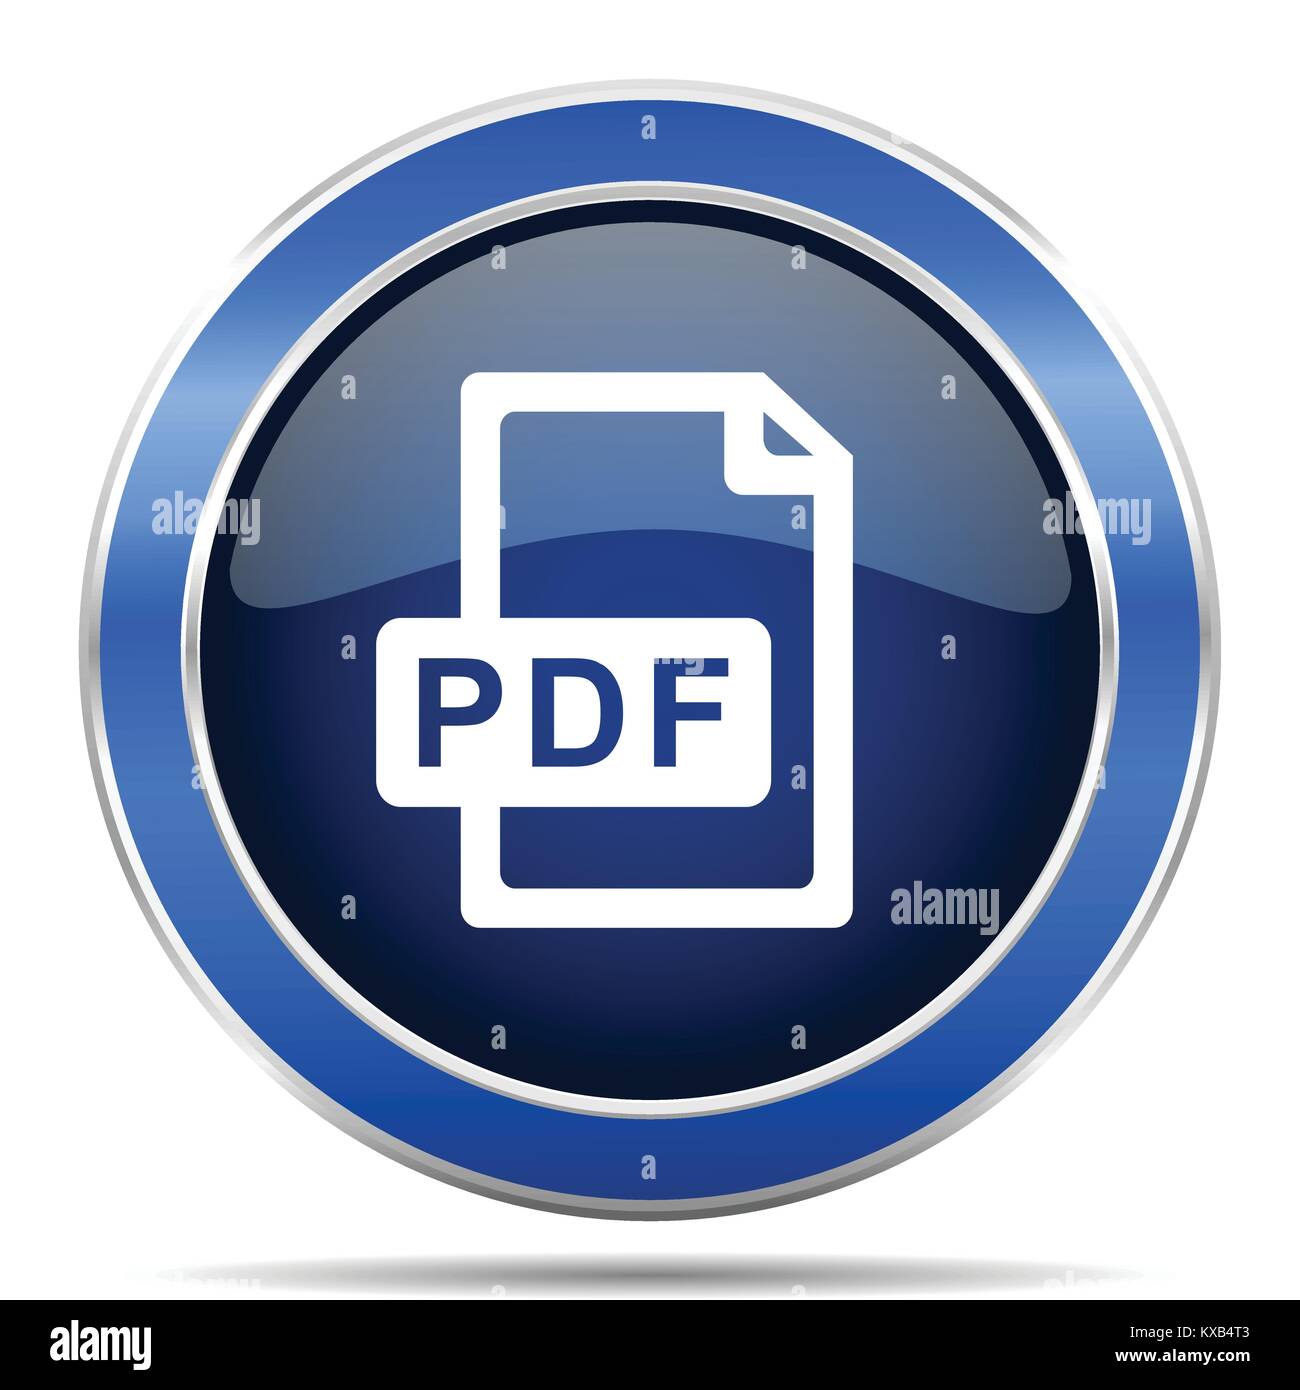 Pdf file vector icon. Modern design blue silver metallic glossy web and mobile applications button in eps 10 Stock Vector